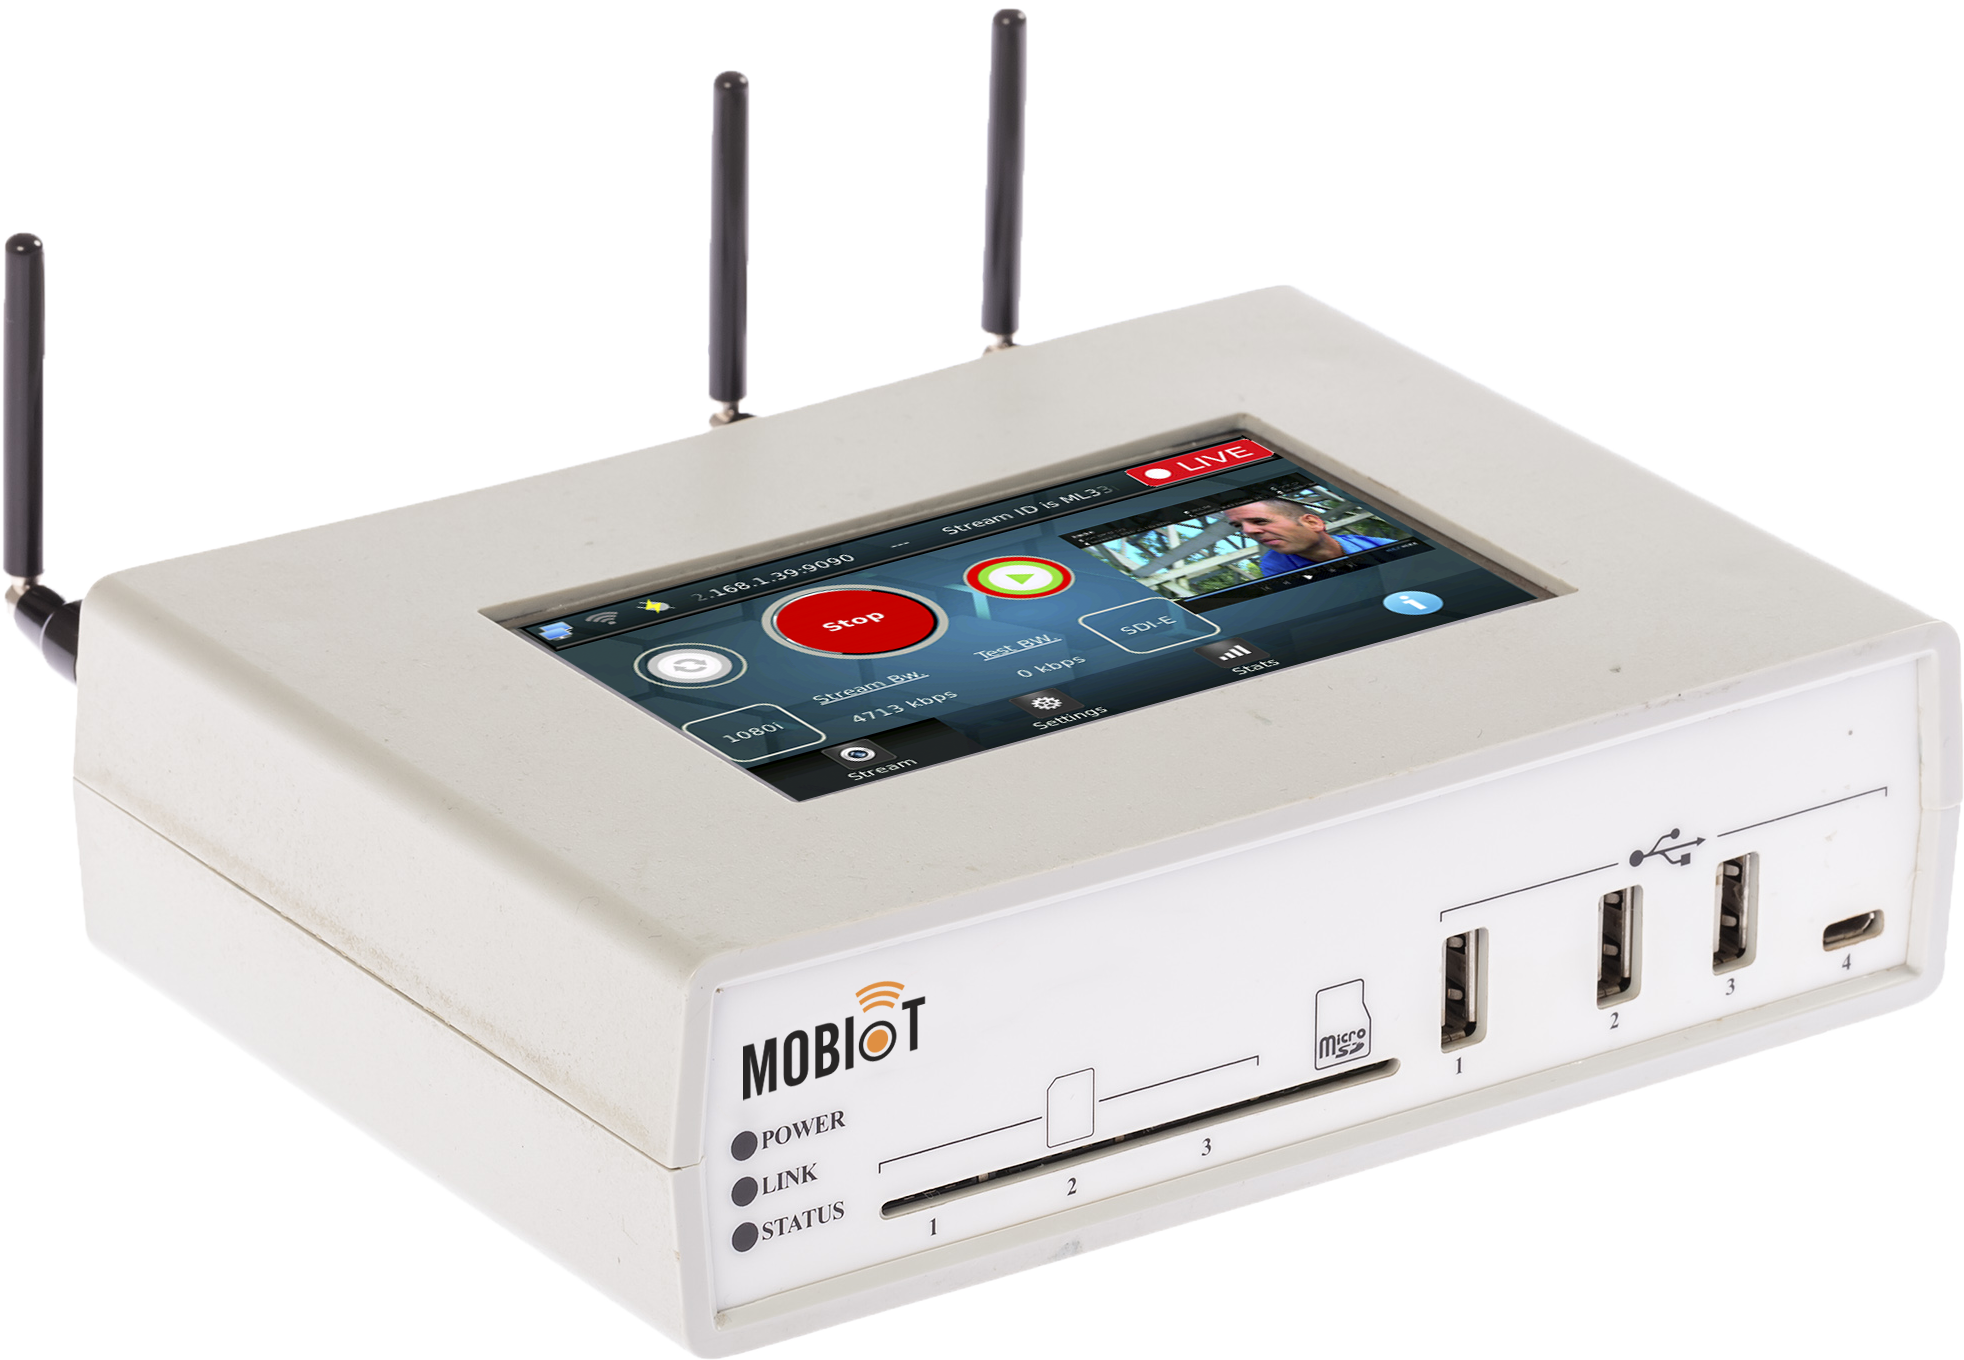 CTech | MOBIoT (Mobile IoT Gateway and Video Streaming Device)